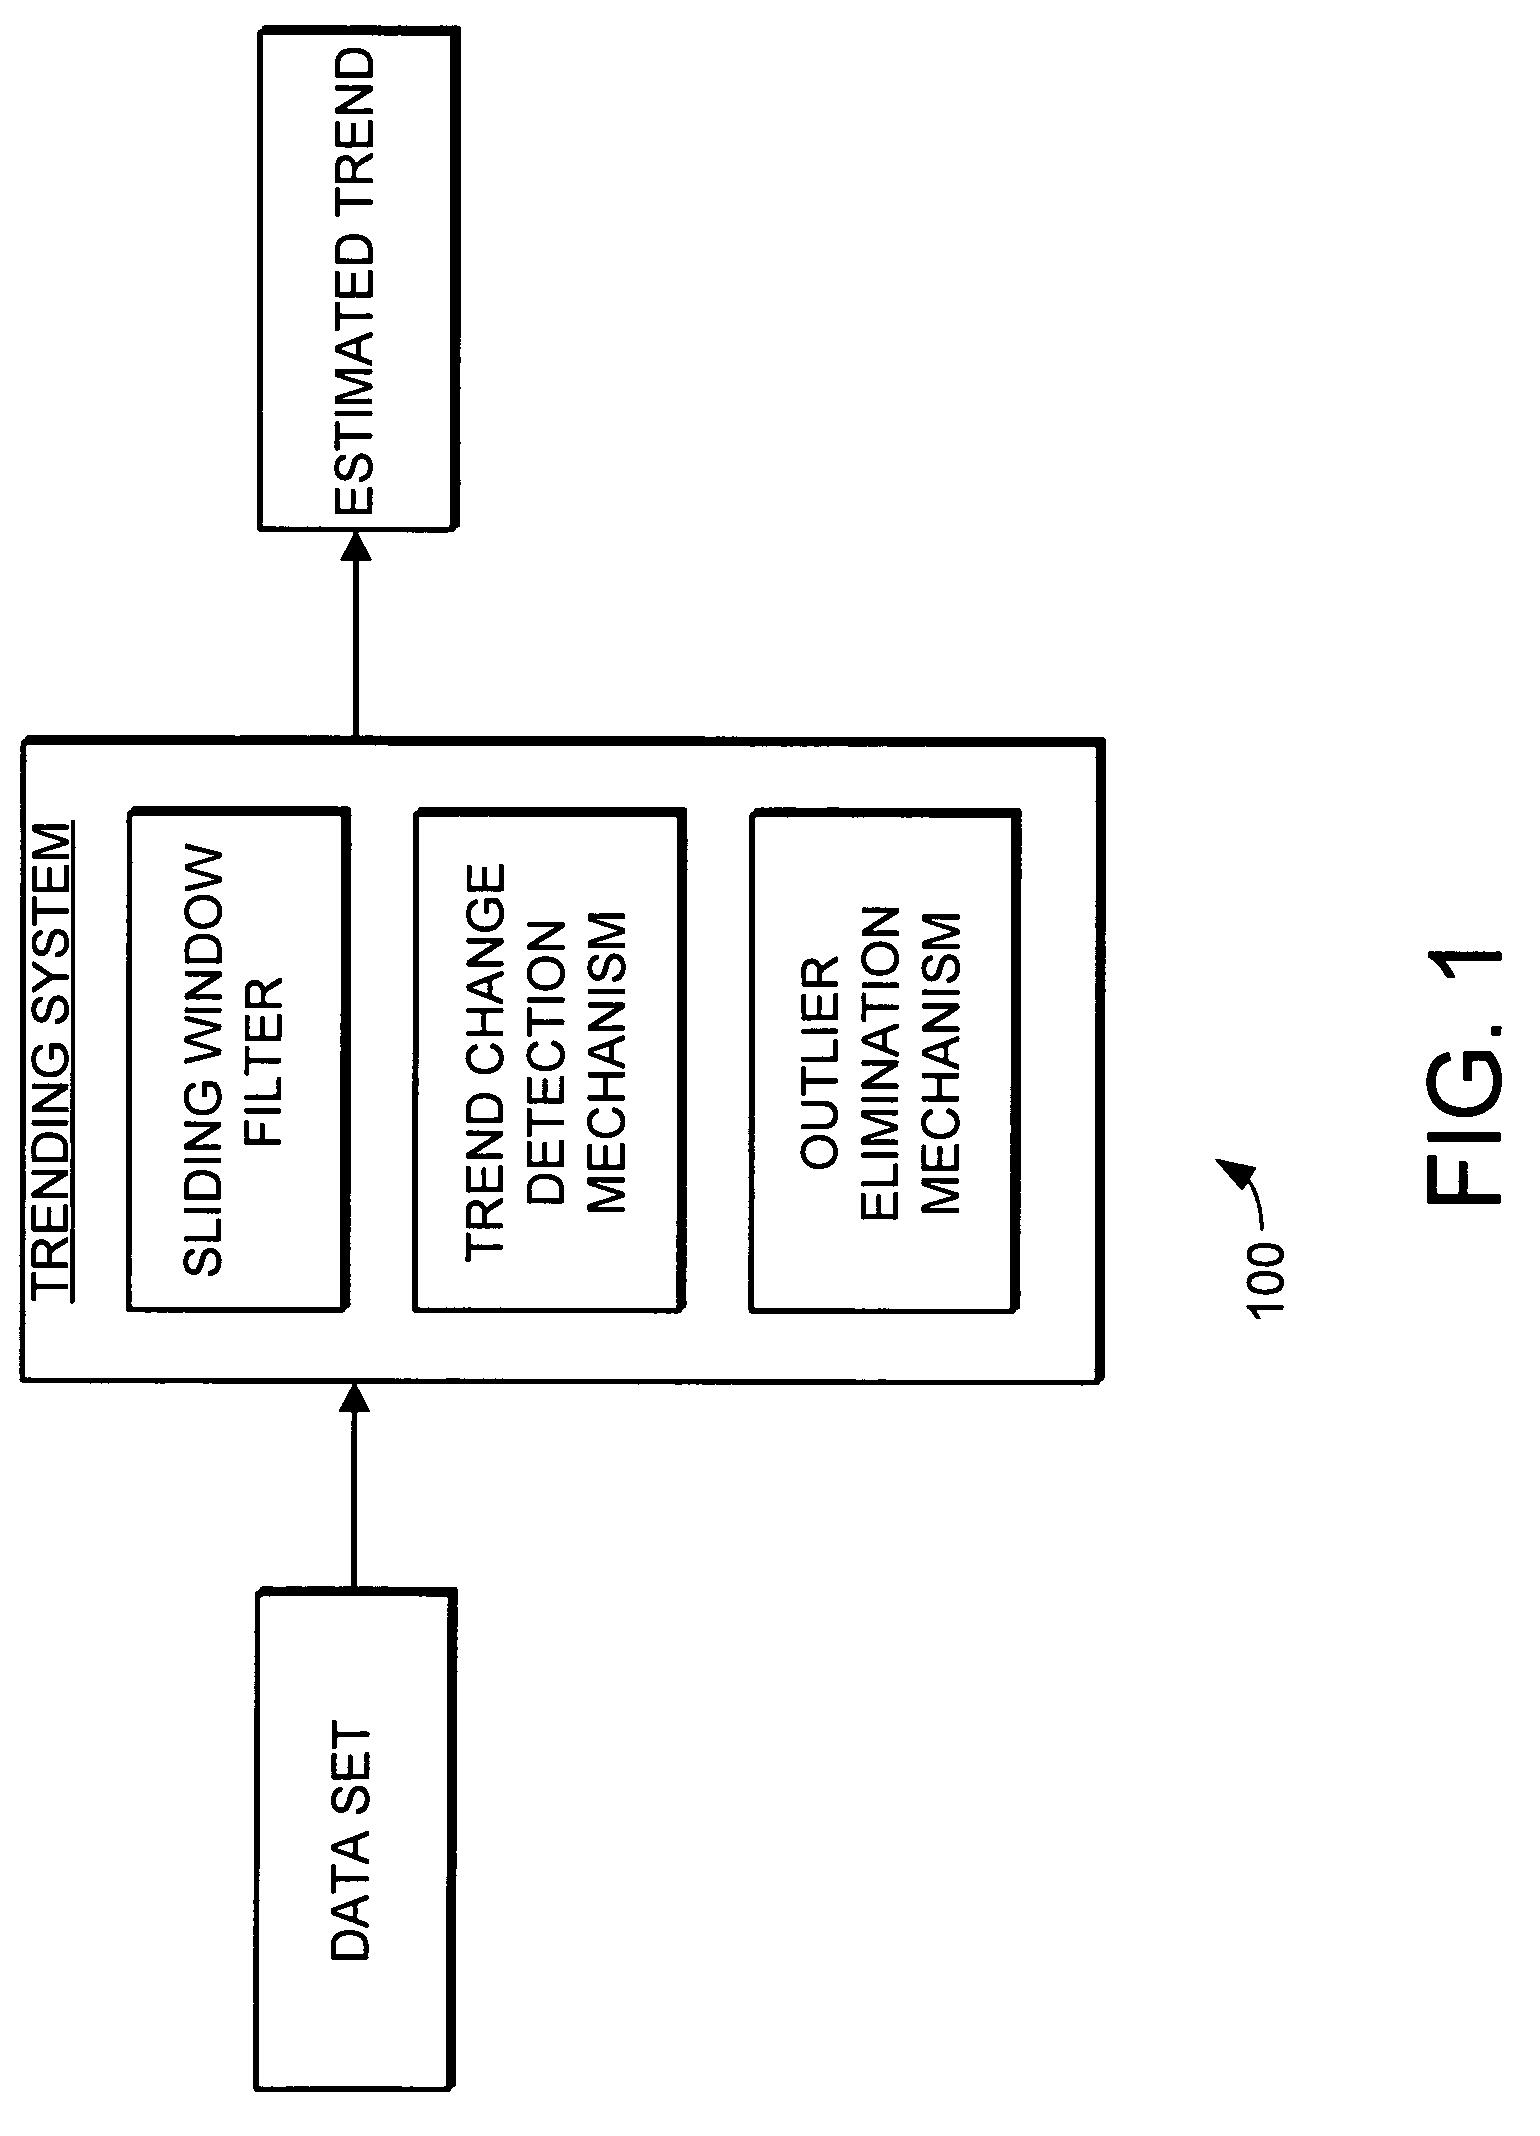 Trending system and method using window filtering